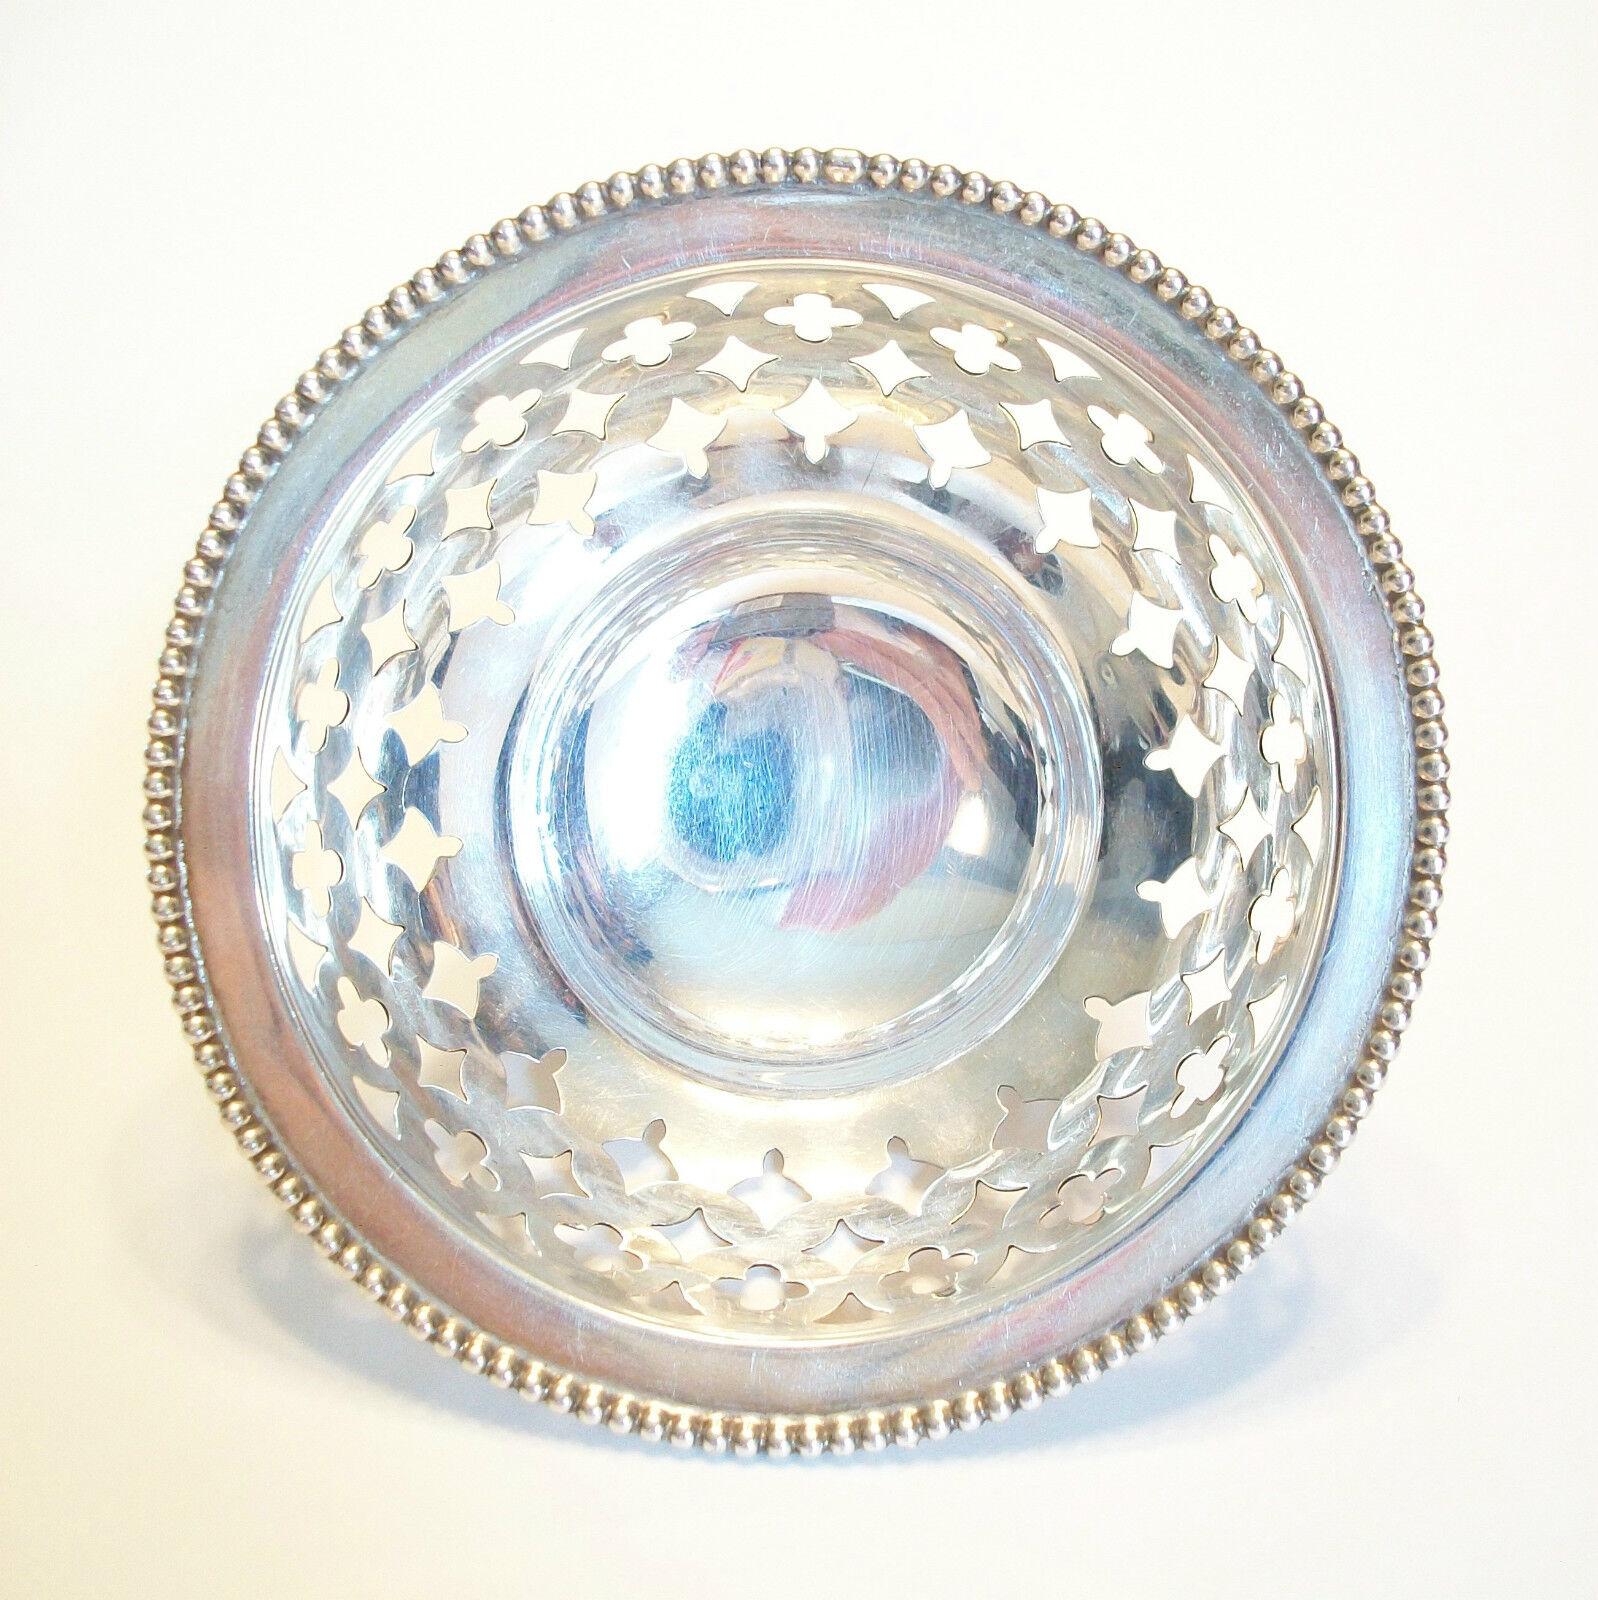 RYRIE BROS. - Pierced Sterling Silver Bonbon Dish - Canada - Early 20th Century In Good Condition For Sale In Chatham, ON